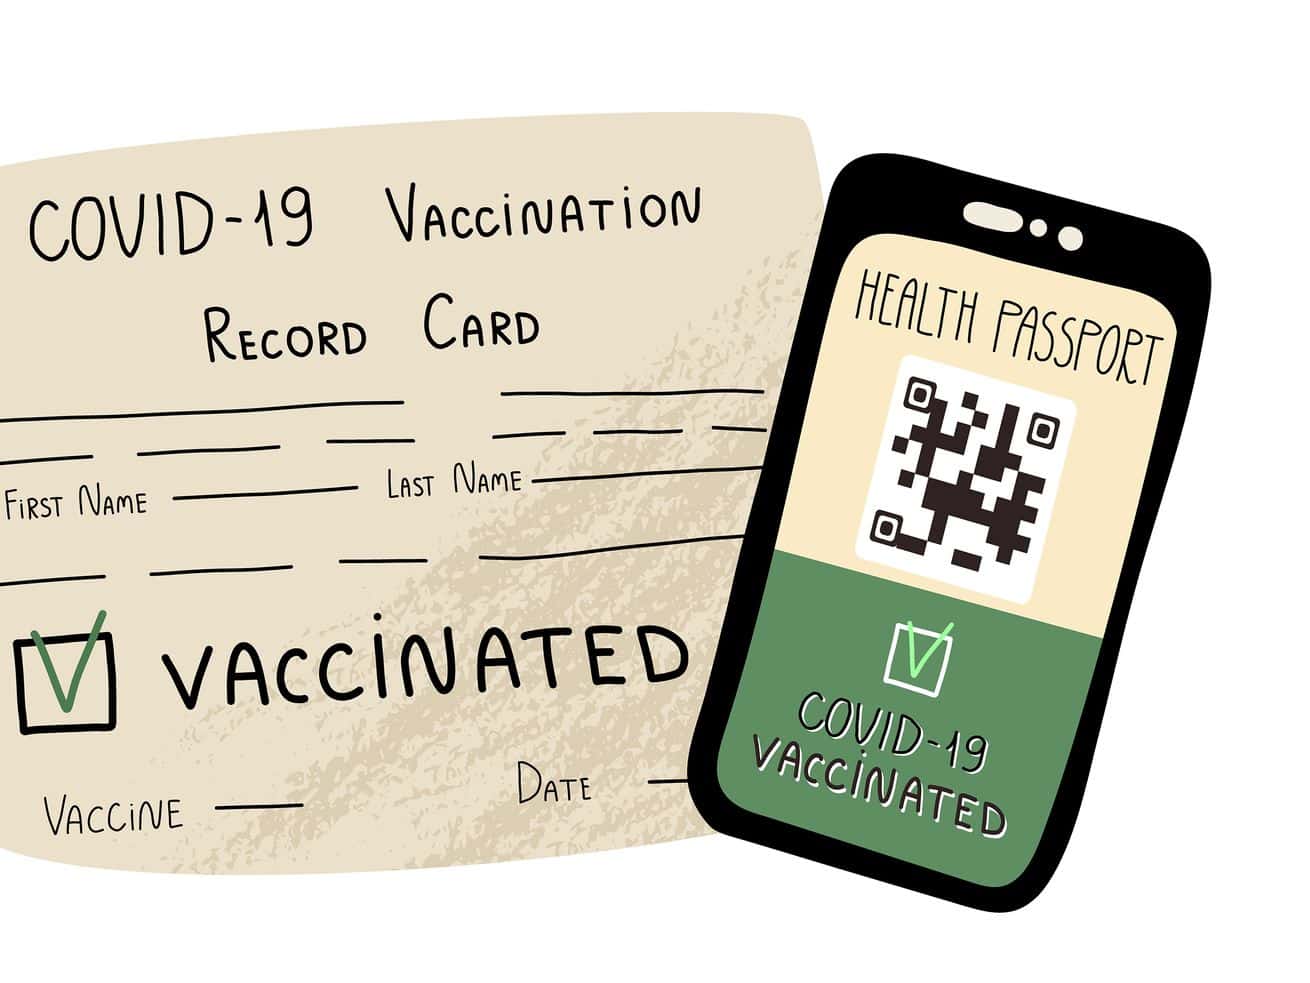 Your most important vaccine passport questions, answered